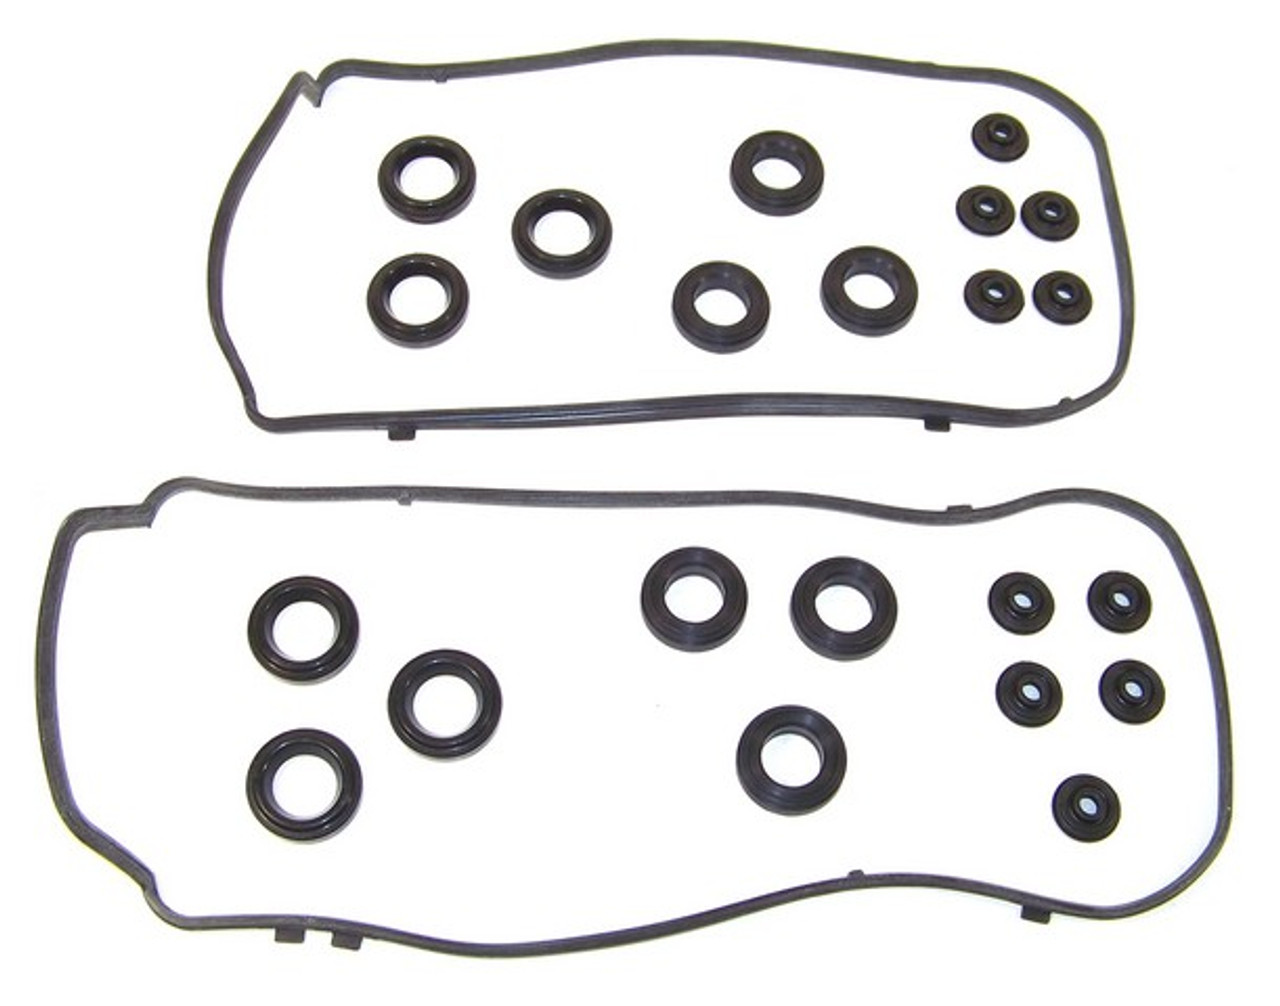 Valve Cover Gasket Set 3.7L 2009 Acura TL - VC268G.15